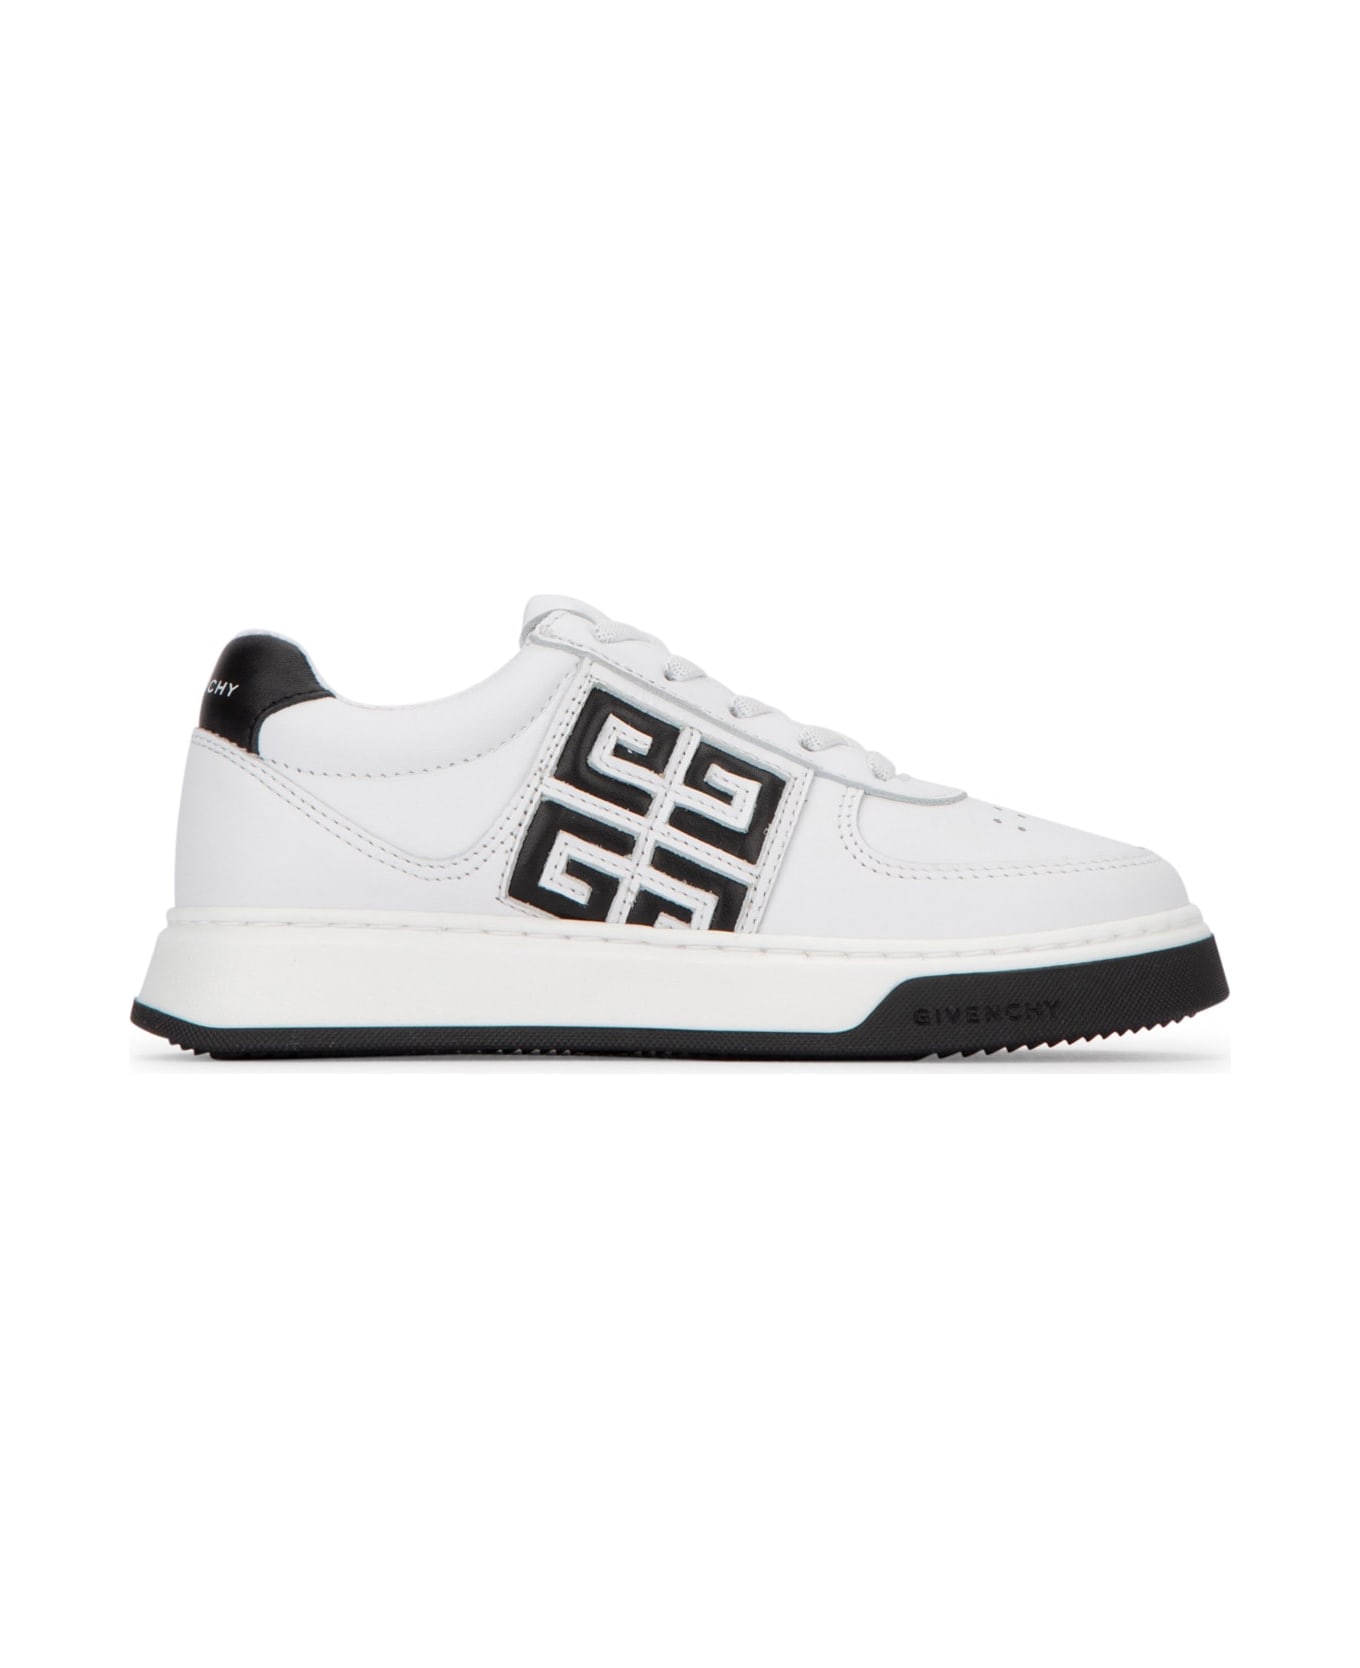 Givenchy Sneakers - White シューズ